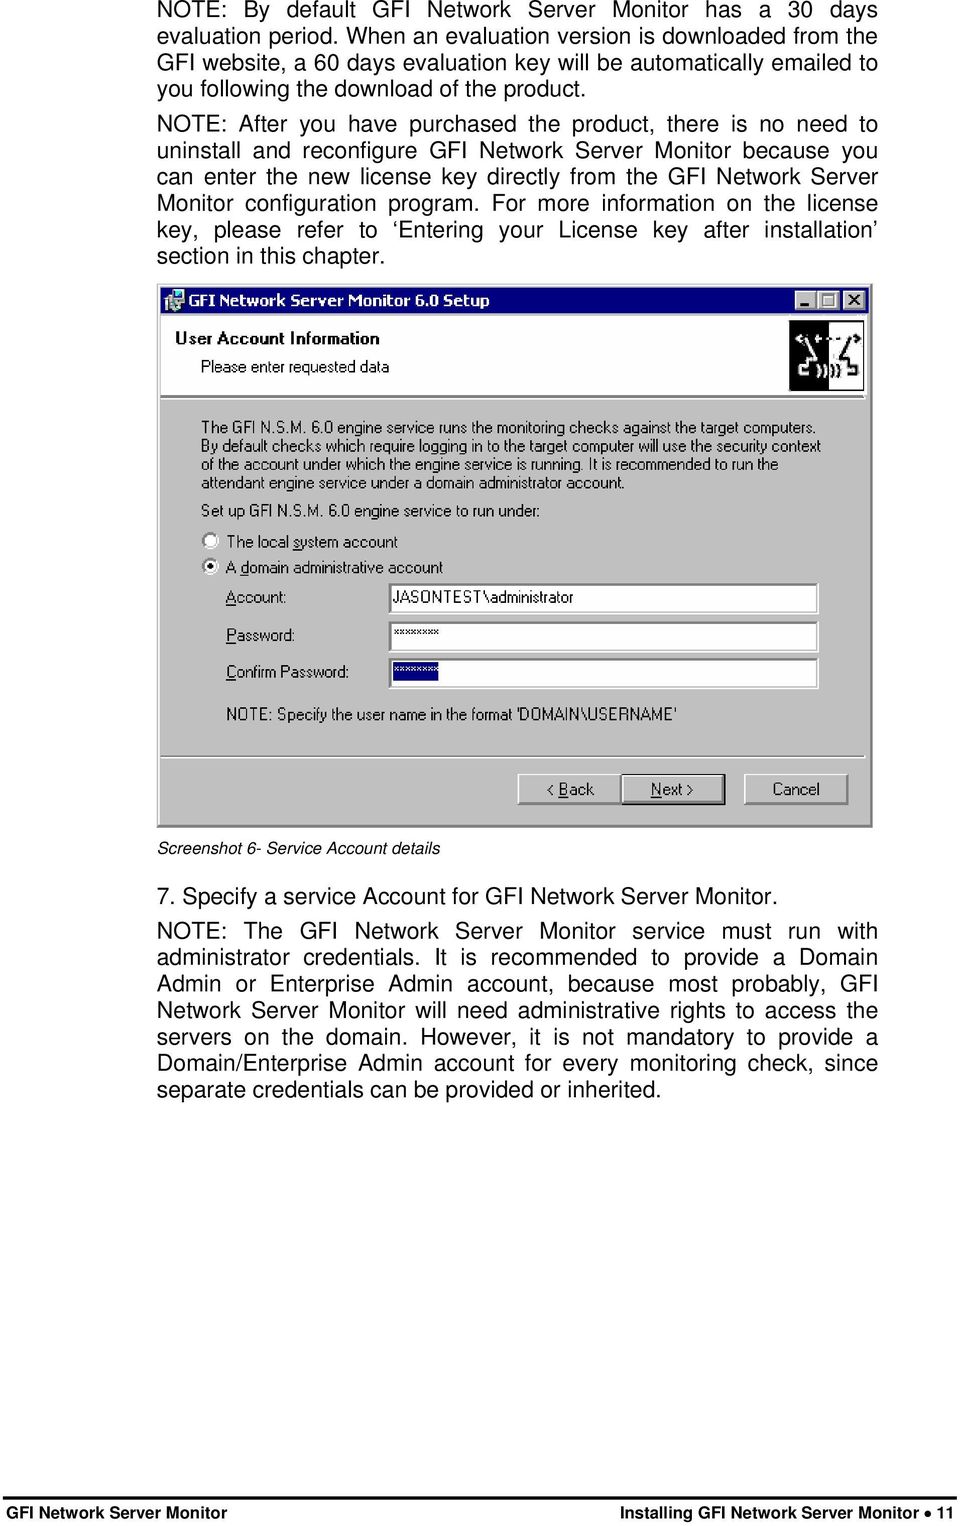 NOTE: After you have purchased the product, there is no need to uninstall and reconfigure GFI Network Server Monitor because you can enter the new license key directly from the GFI Network Server